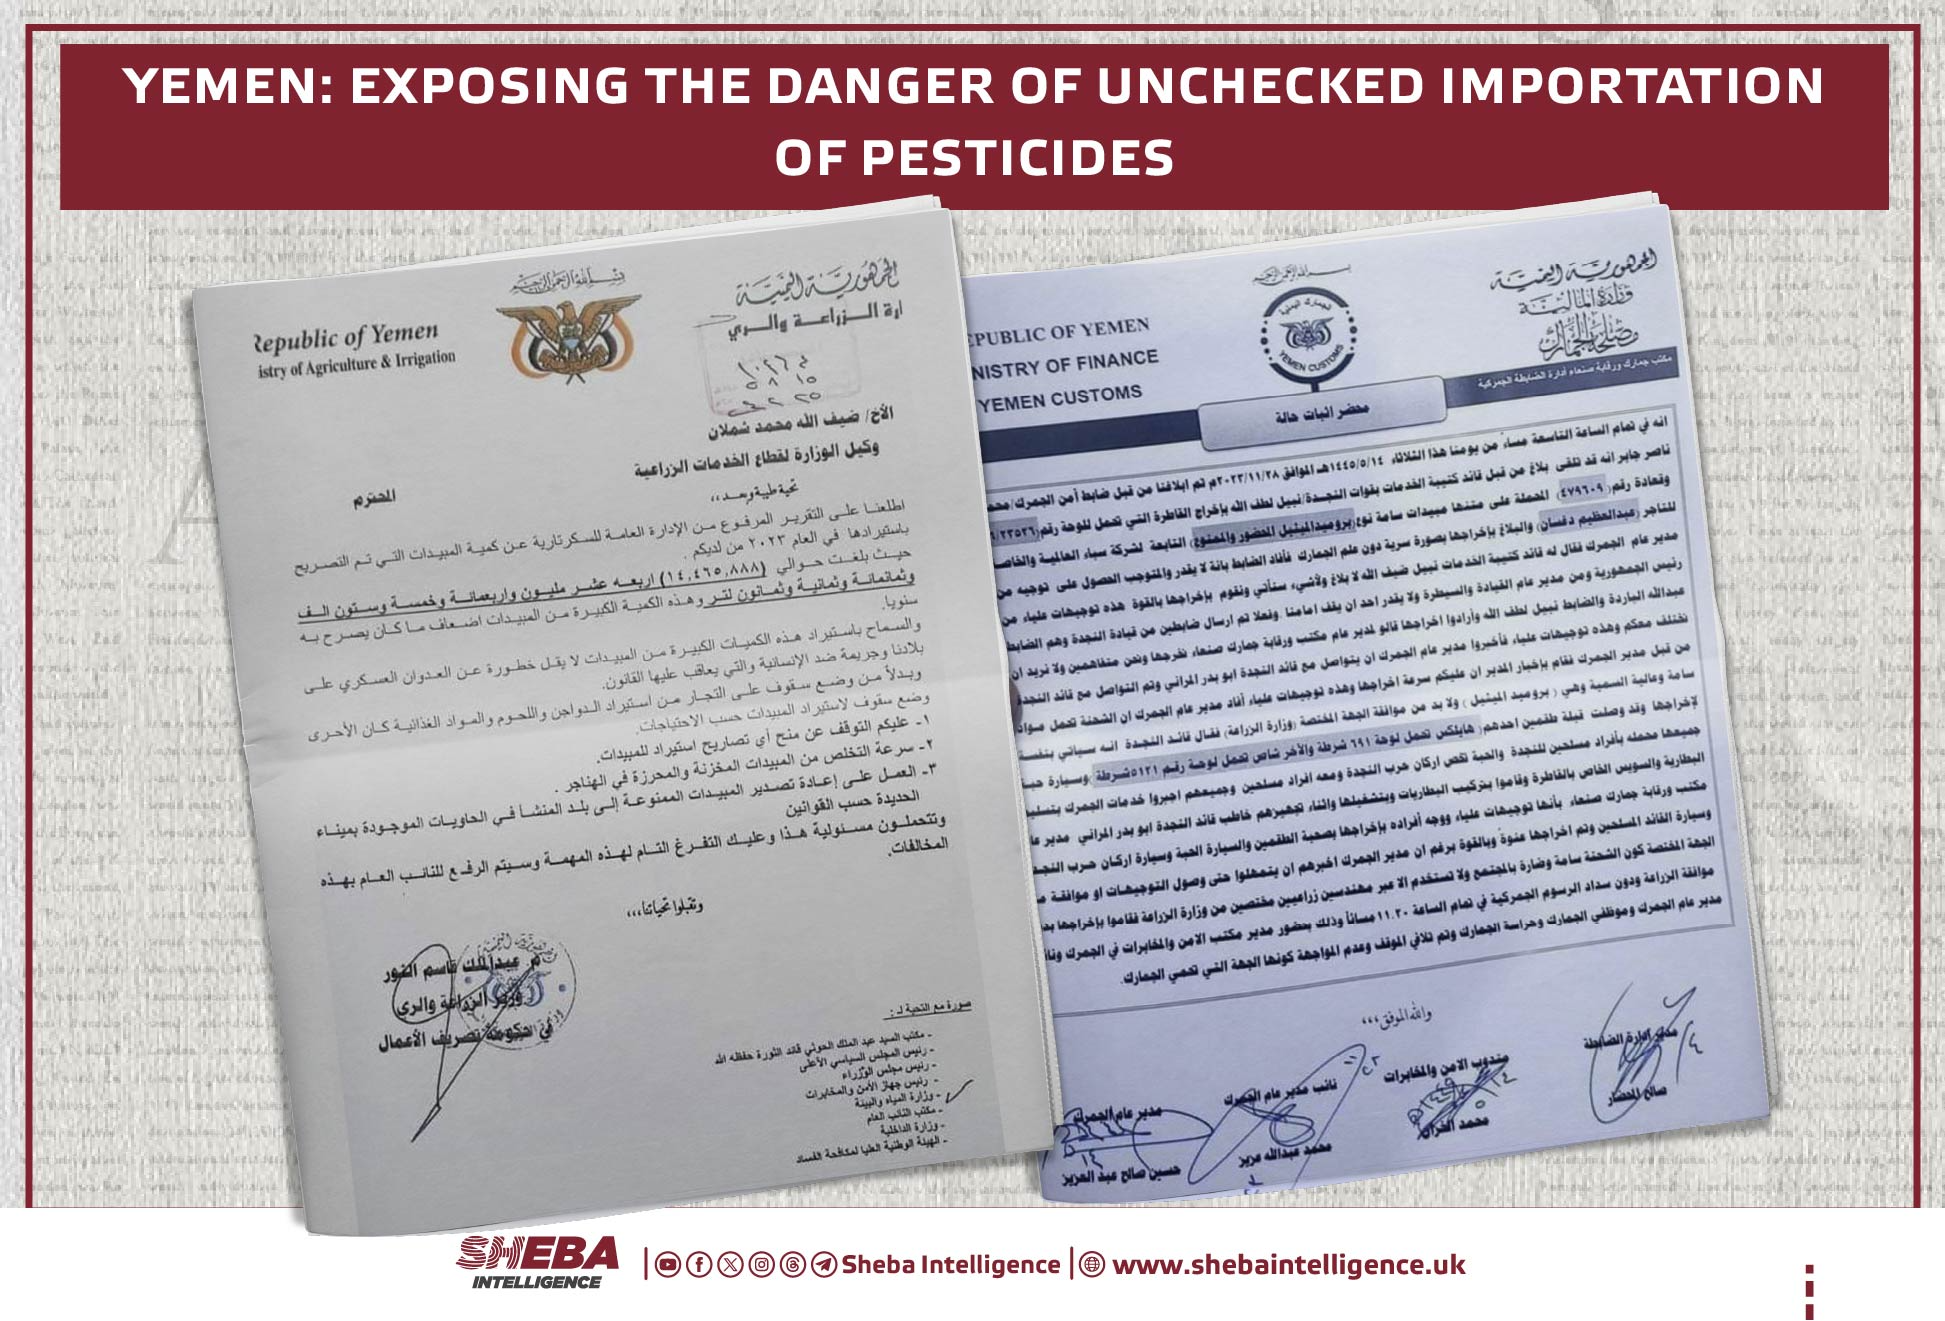 Yemen: Exposing the Danger of Unchecked Importation of Pesticides